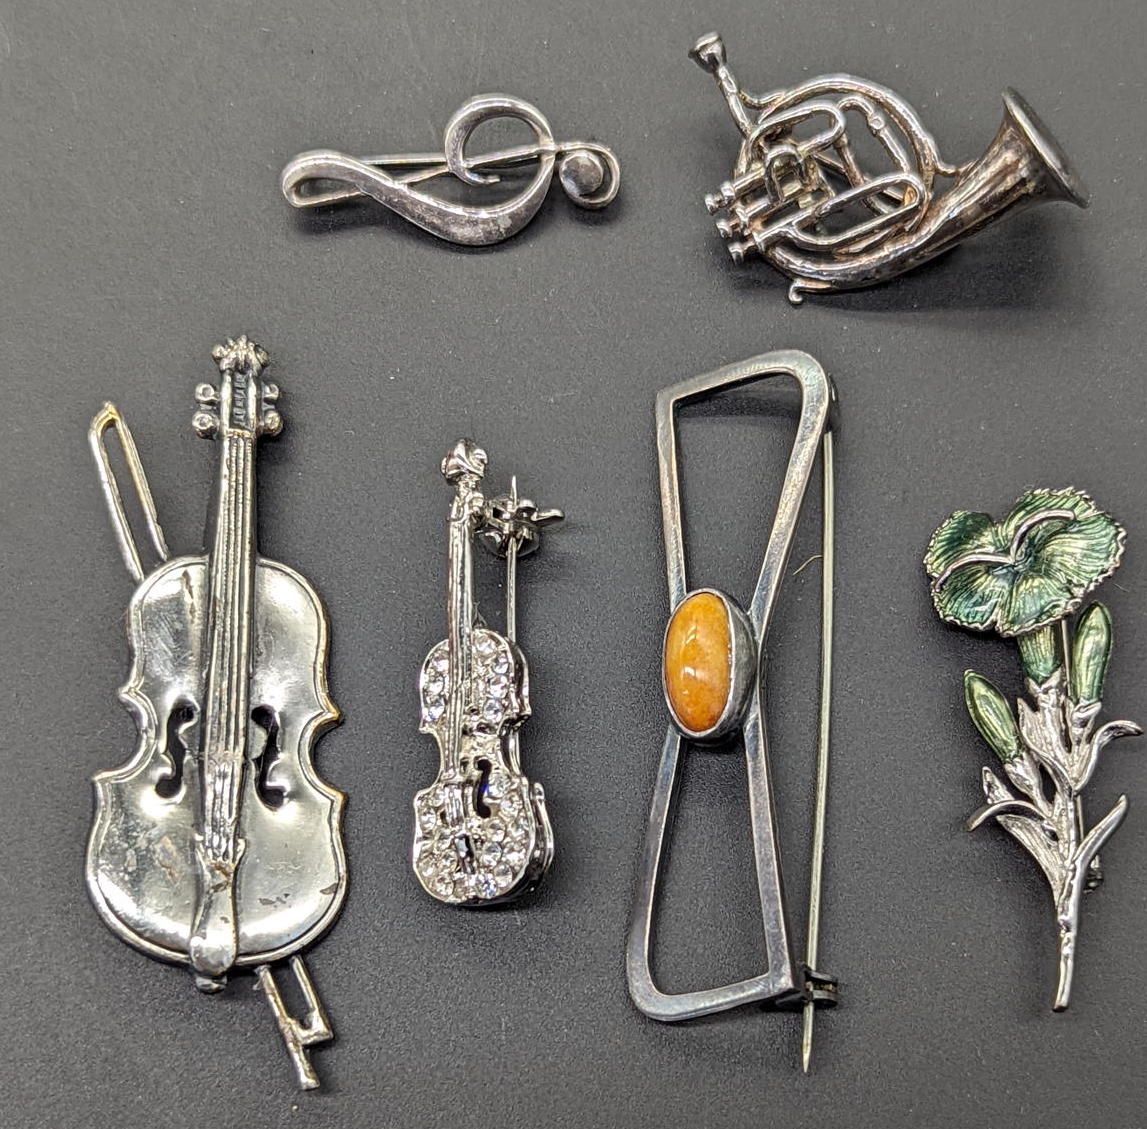 Null A collection of brooches, mostly musical instruments, violins, some silver